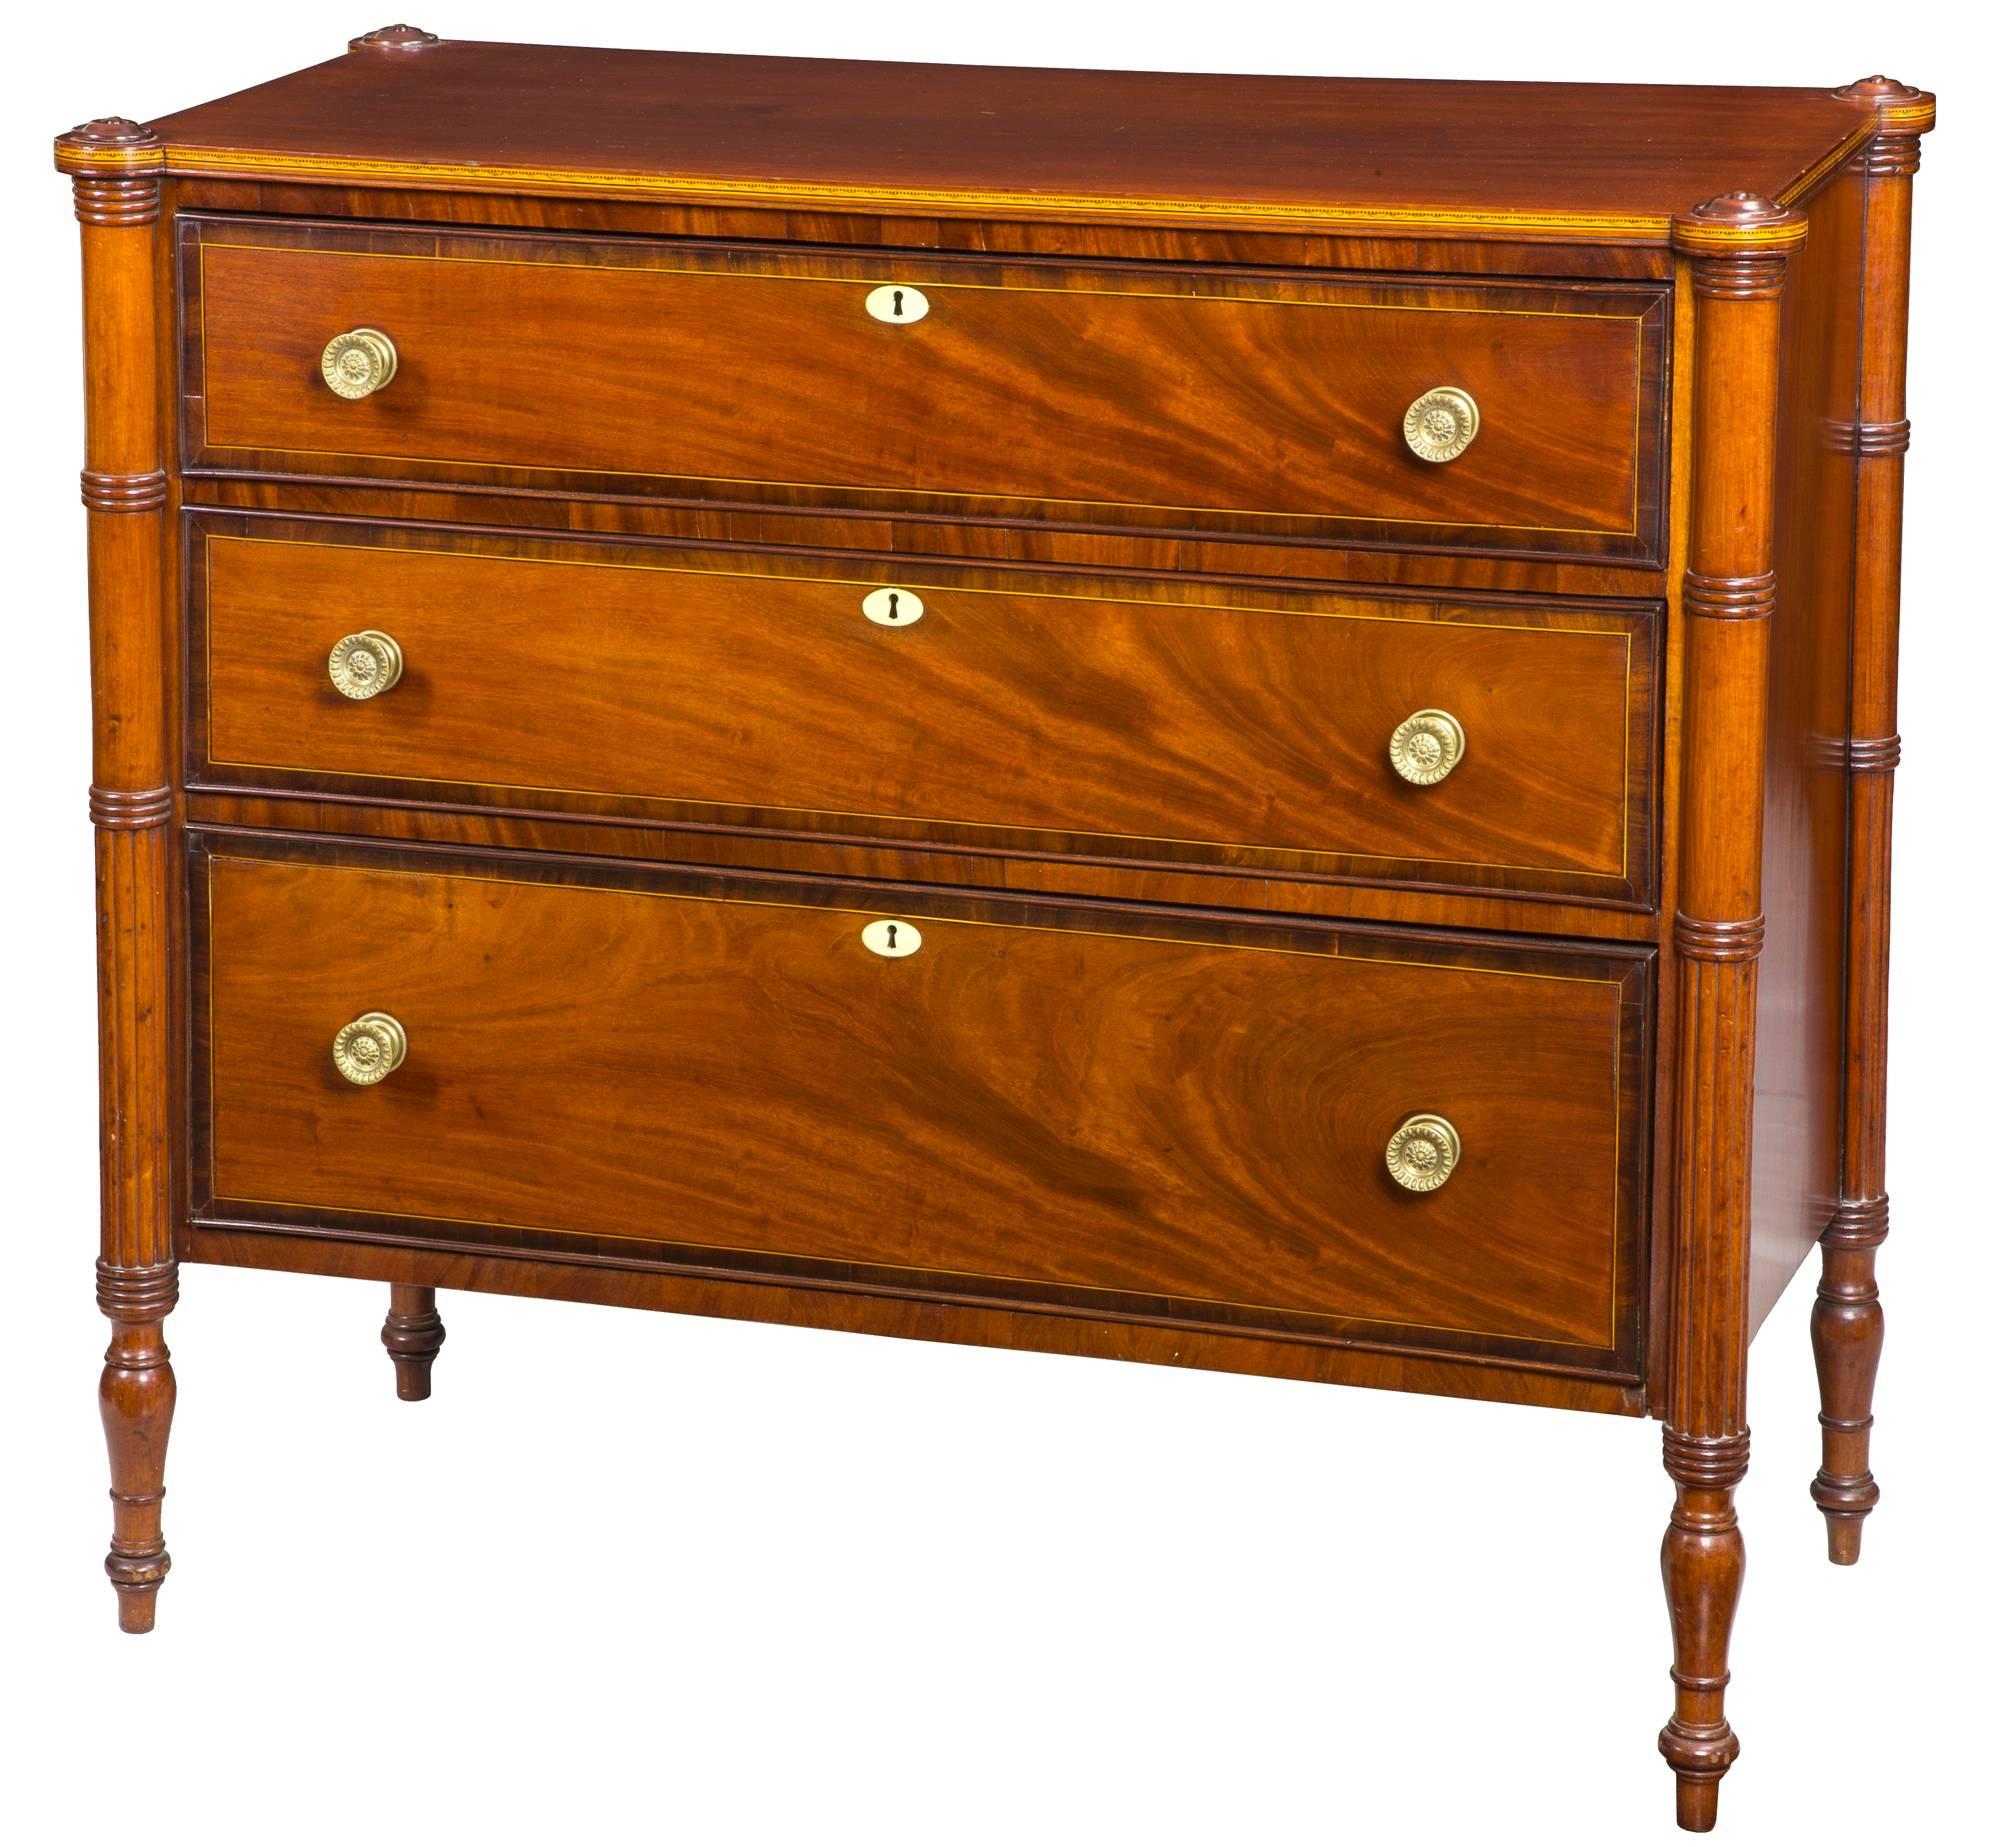 This chest is stylized on the Boston models popular at the time which, however, we think, is probably Rhode Island as the secondary woods are chestnut, which is typical of furniture produced there. The mahogany has a deep red-brown color and the